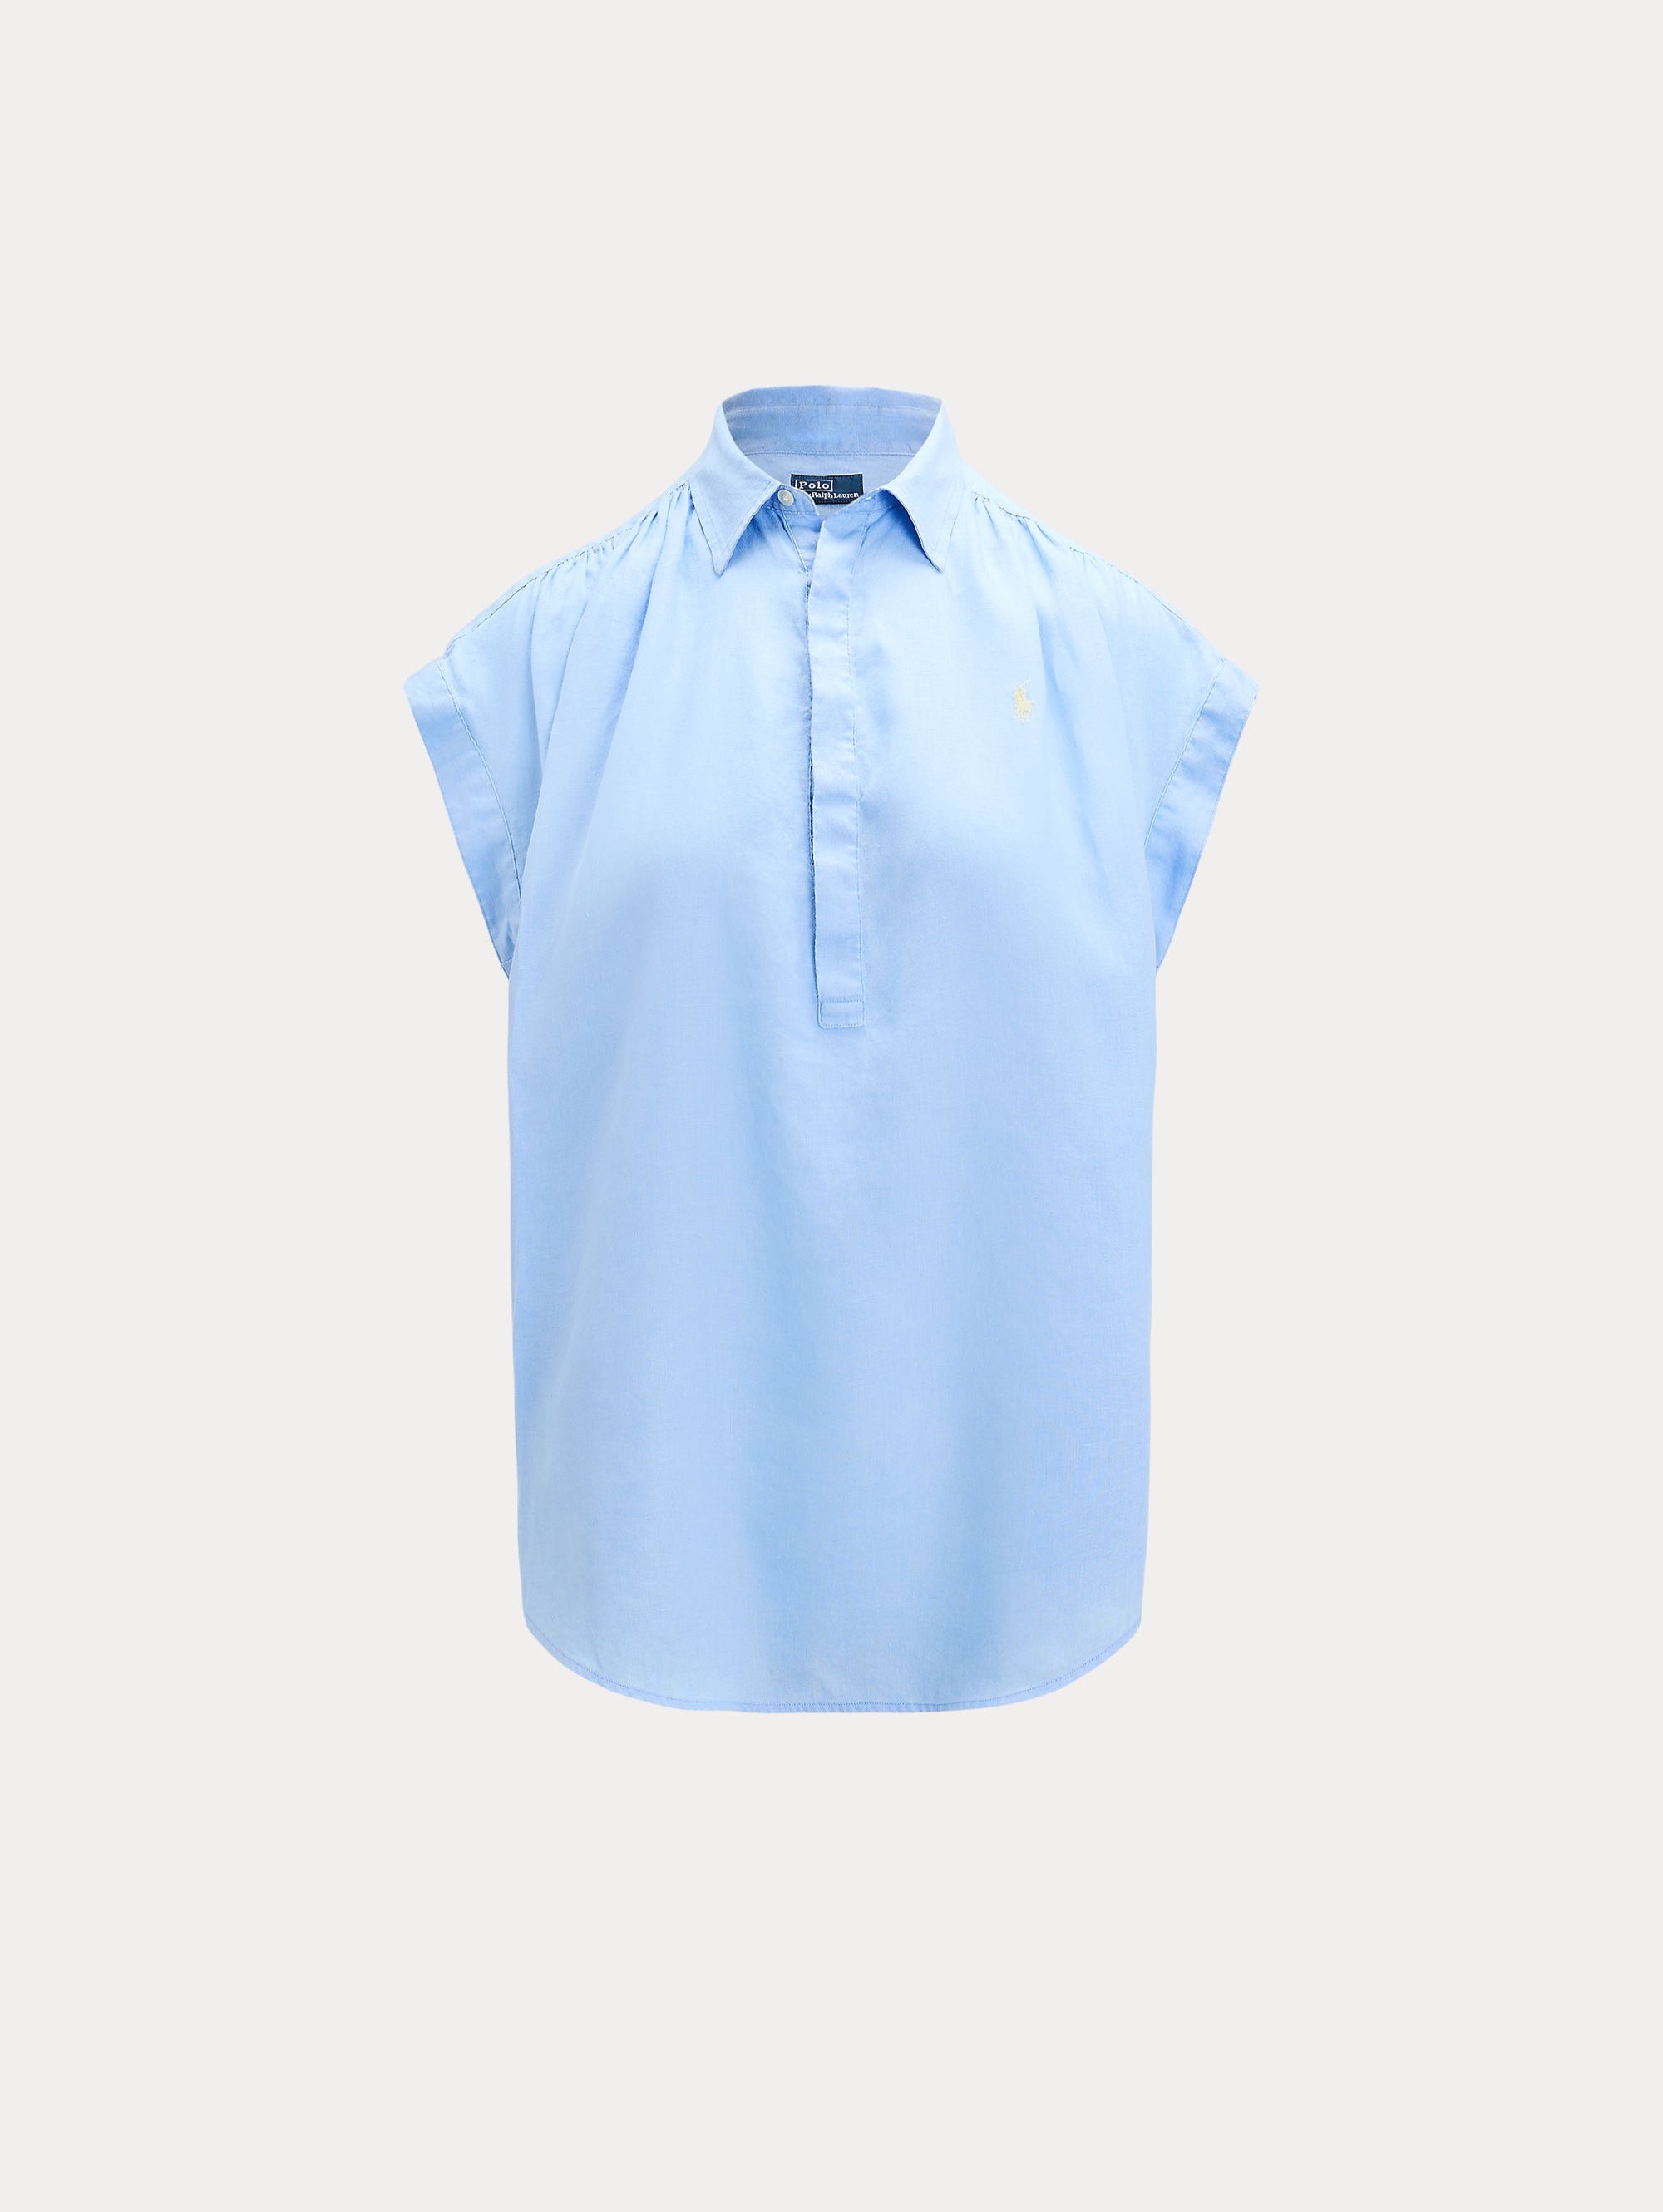 Linen Shirt with Blue Gathers